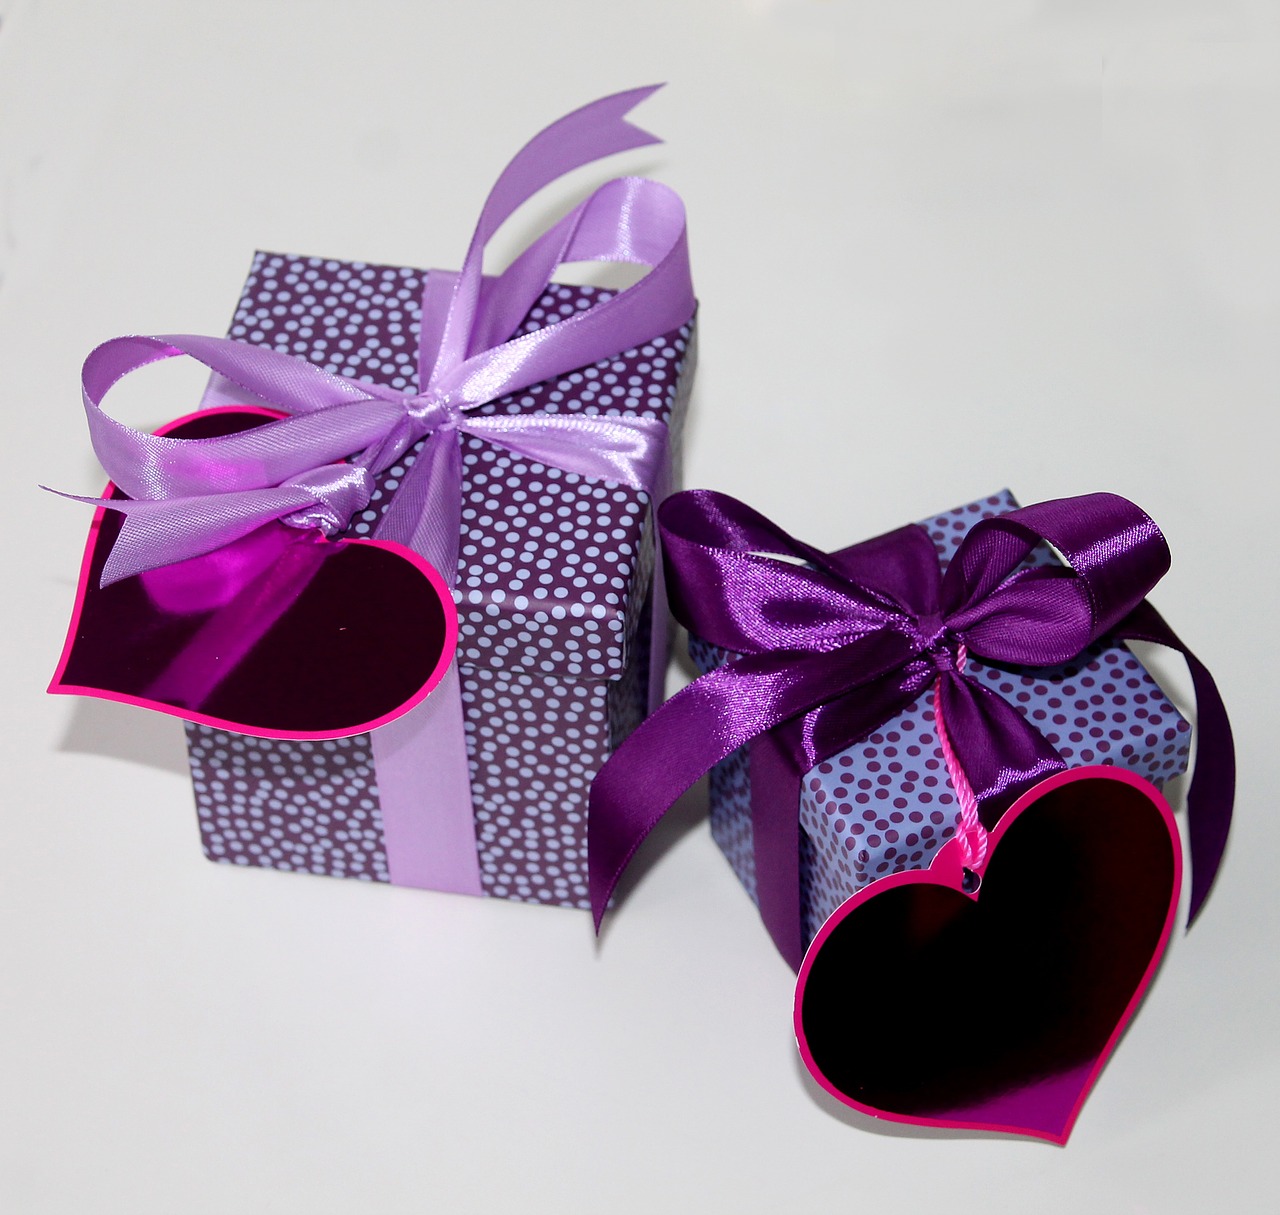 packages gifts boxes free photo